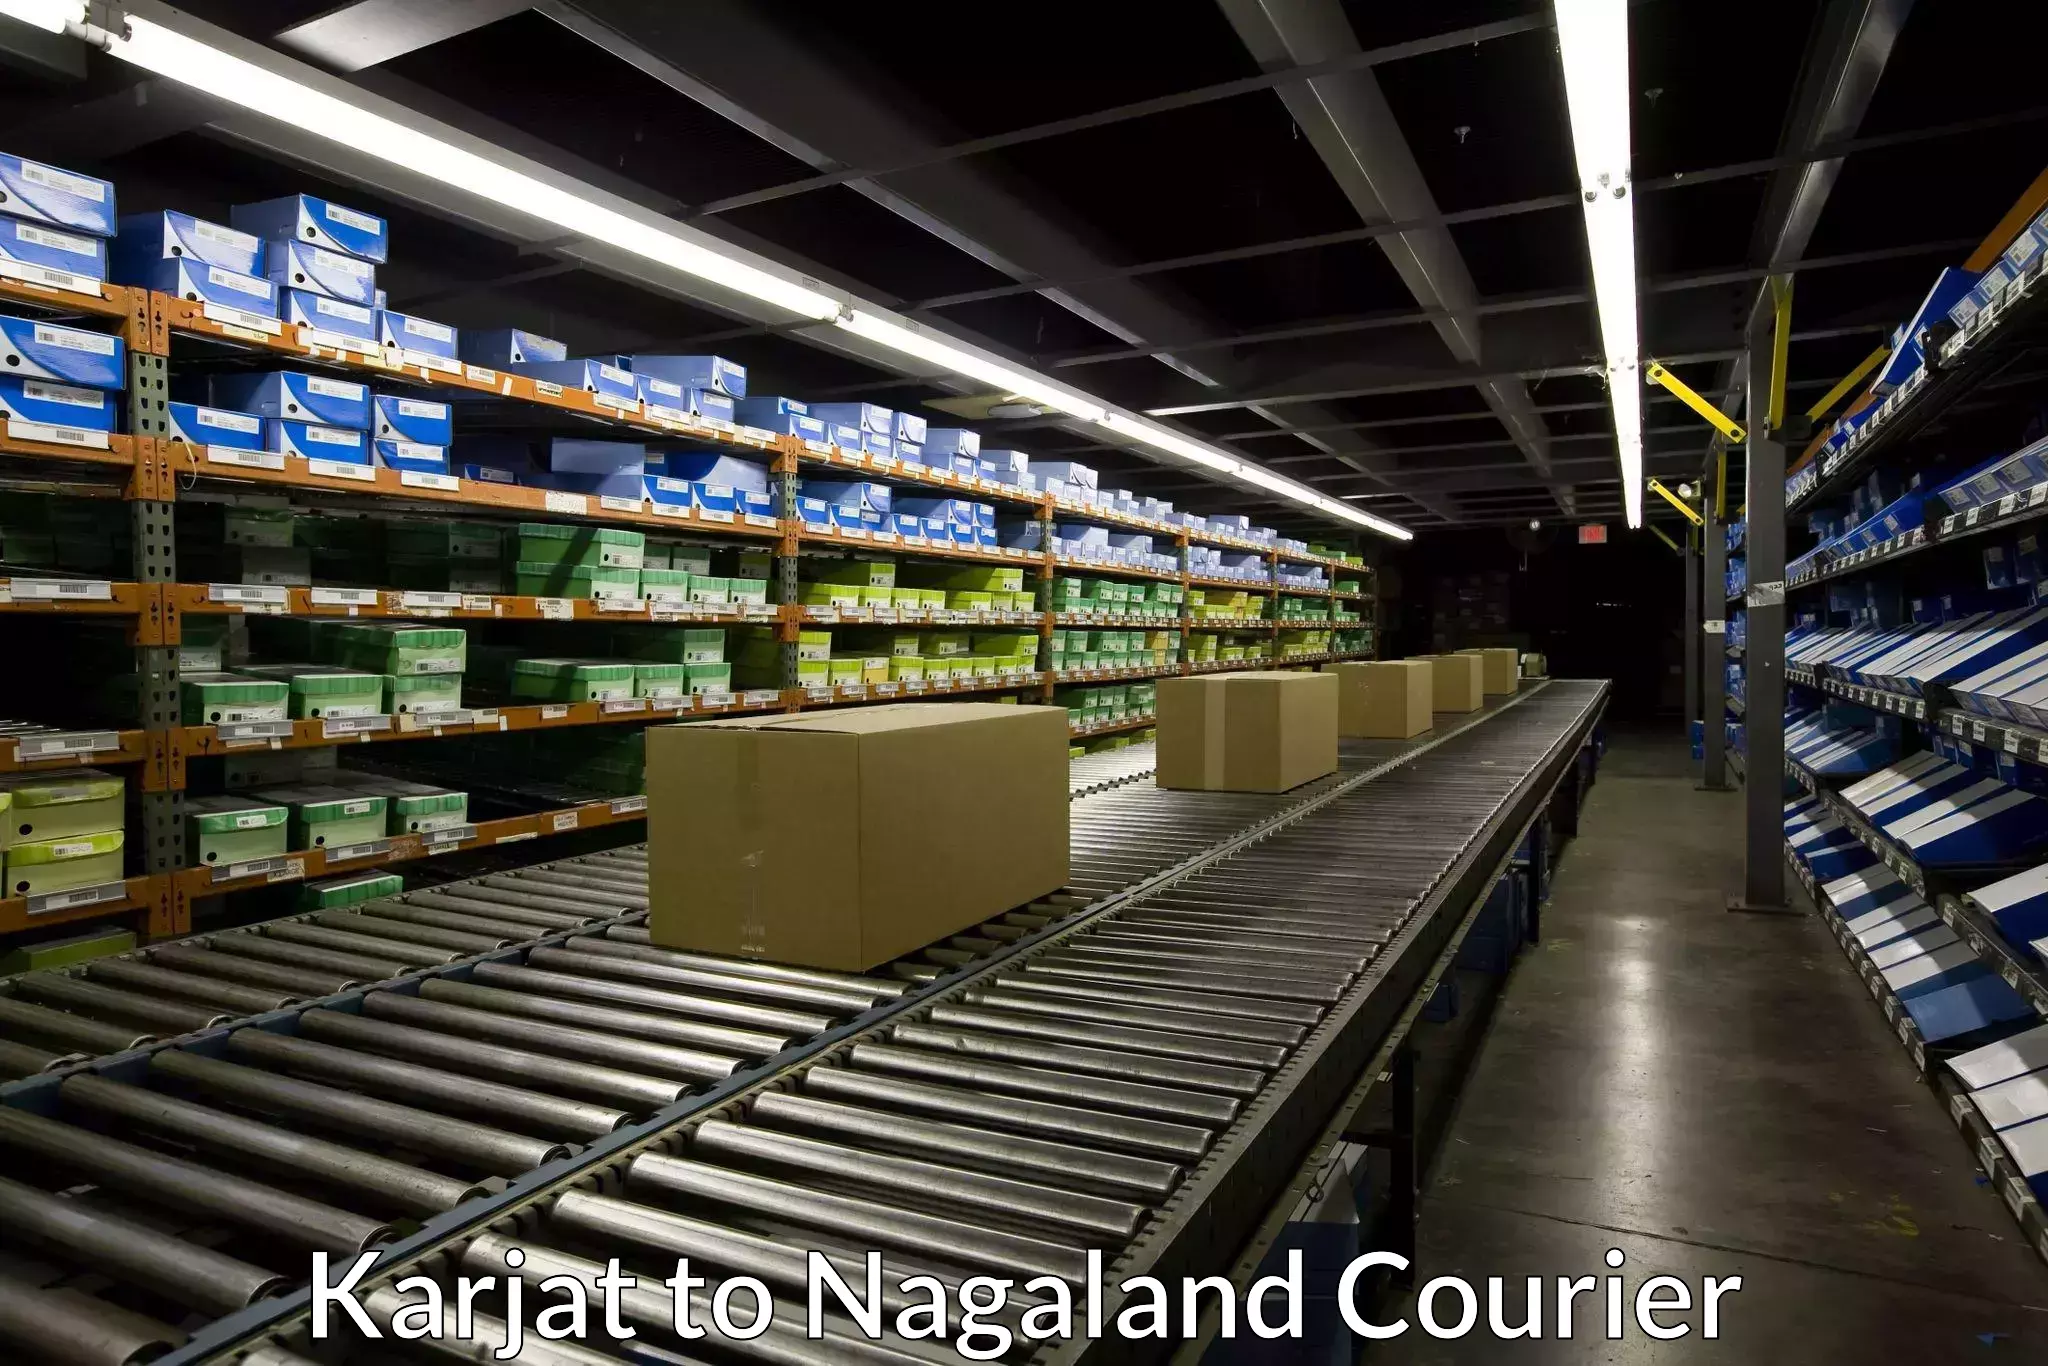 State-of-the-art courier technology Karjat to Nagaland